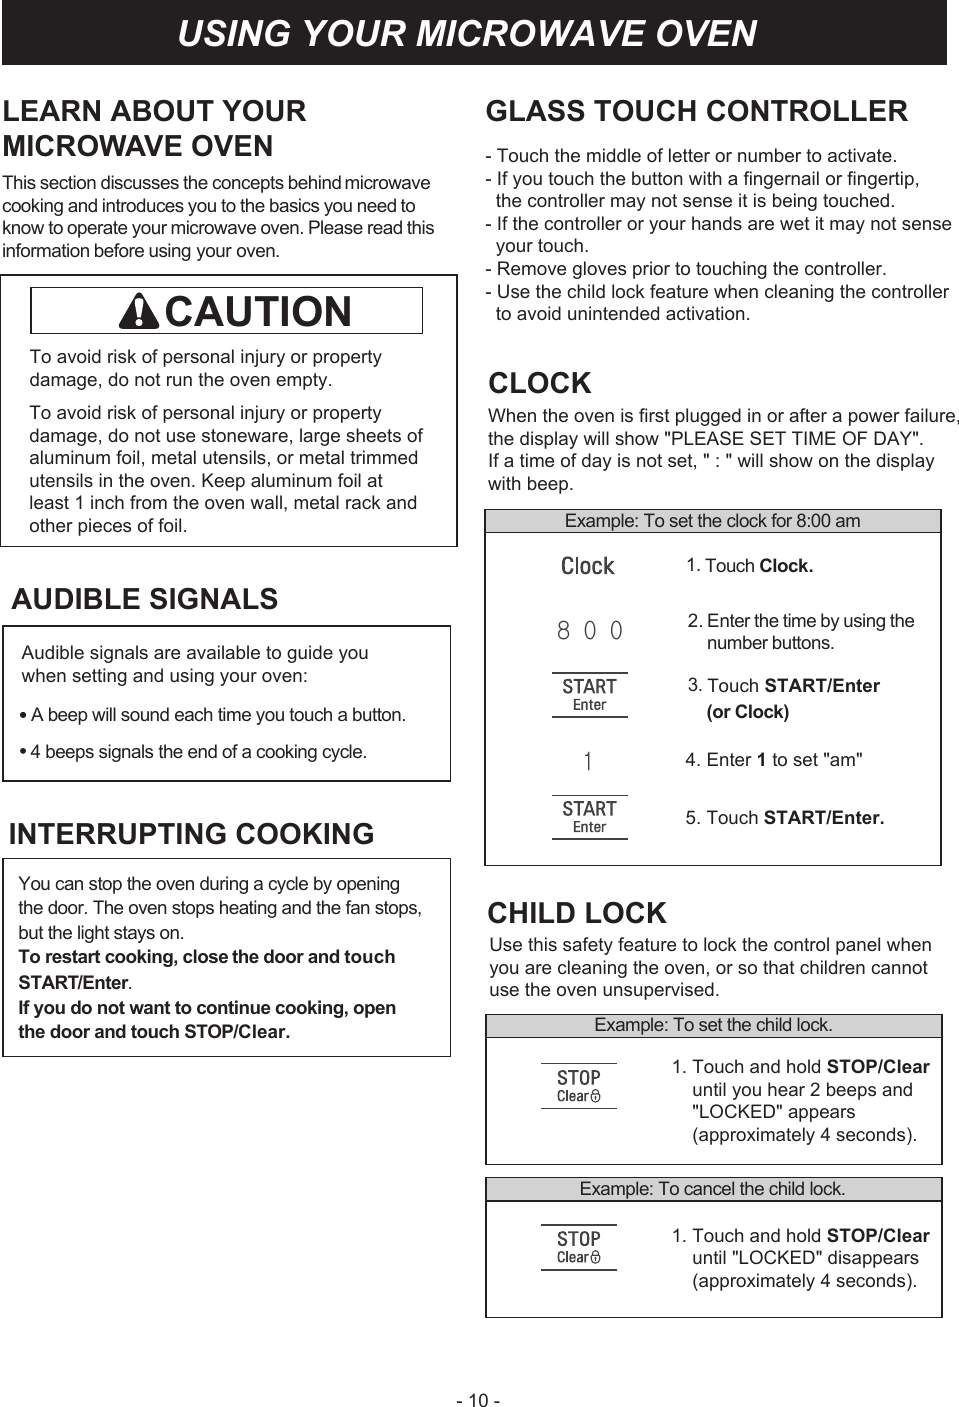 - 10 -LEARN ABOUT YOURMICROWAVE OVENThis section discusses the concepts behind GLASS TOUCH CONTROLLER- Touch the middle of letter or number to activate.- If you touch the button with a fingernail or fingertip,   the controller may not sense it is being touched.- If the controller or your hands are wet it may not sense   your touch.- Remove gloves prior to touching the controller.- Use the child lock feature when cleaning the controller   to avoid unintended activation. microwave cooking and introduces you to the basics you need to know to operate your microwave oven. Please read this information before using your oven.To avoid risk of personal injury or property damage, do not run the oven empty.To avoid risk of personal injury or property damage, do not use stoneware, large sheets of aluminum foil, metal utensils, or metal trimmed utensils in the oven. Keep aluminum foil at least 1 inch from the oven wall, metal rack and other pieces of foil. Example: Tosettheclockfor8:00 amCLOCKWhen the oven is first plugged in or after a power failure,the display will show &quot;PLEASE SET TIME OF DAY&quot;. If a time of day is not set, &quot; : &quot; will show on the display with beep.2. Enter the time by using thenumber buttons.4. Enter 1 to set &quot;am&quot;5. Touch START/Enter.1. Touch Clock.3. Touch START/Enter(or Clock)Example: To set the childlock.1. Touch and hold STOP/Clear     until you hear 2 beeps and     &quot;LOCKED&quot; appears    (approximately 4 seconds).1. Touch and hold STOP/Clear     until &quot;LOCKED&quot; disappears    (approximately 4 seconds).Example: To cancelthechildlock.CHILD LOCKUse this safety feature to lock the control panel whenyou are cleaning the oven, or so that children cannotuse the oven unsupervised.USING YOUR MICROWAVE OVENCAUTIONAUDIBLE SIGNALS•A beep will sound each time you touch a button.4 beeps signals the end of a cooking cycle.You can stop the oven during a cycle by opening the door. The oven stops heating and the fan stops, but the light stays on.To restart cooking, closethe door and touchSTART/Enter.If you do not want to continue cooking, open the door and touch STOP/Clear.INTERRUPTING COOKINGAudible signals are available to guide you when setting and using your oven:••8 0   01